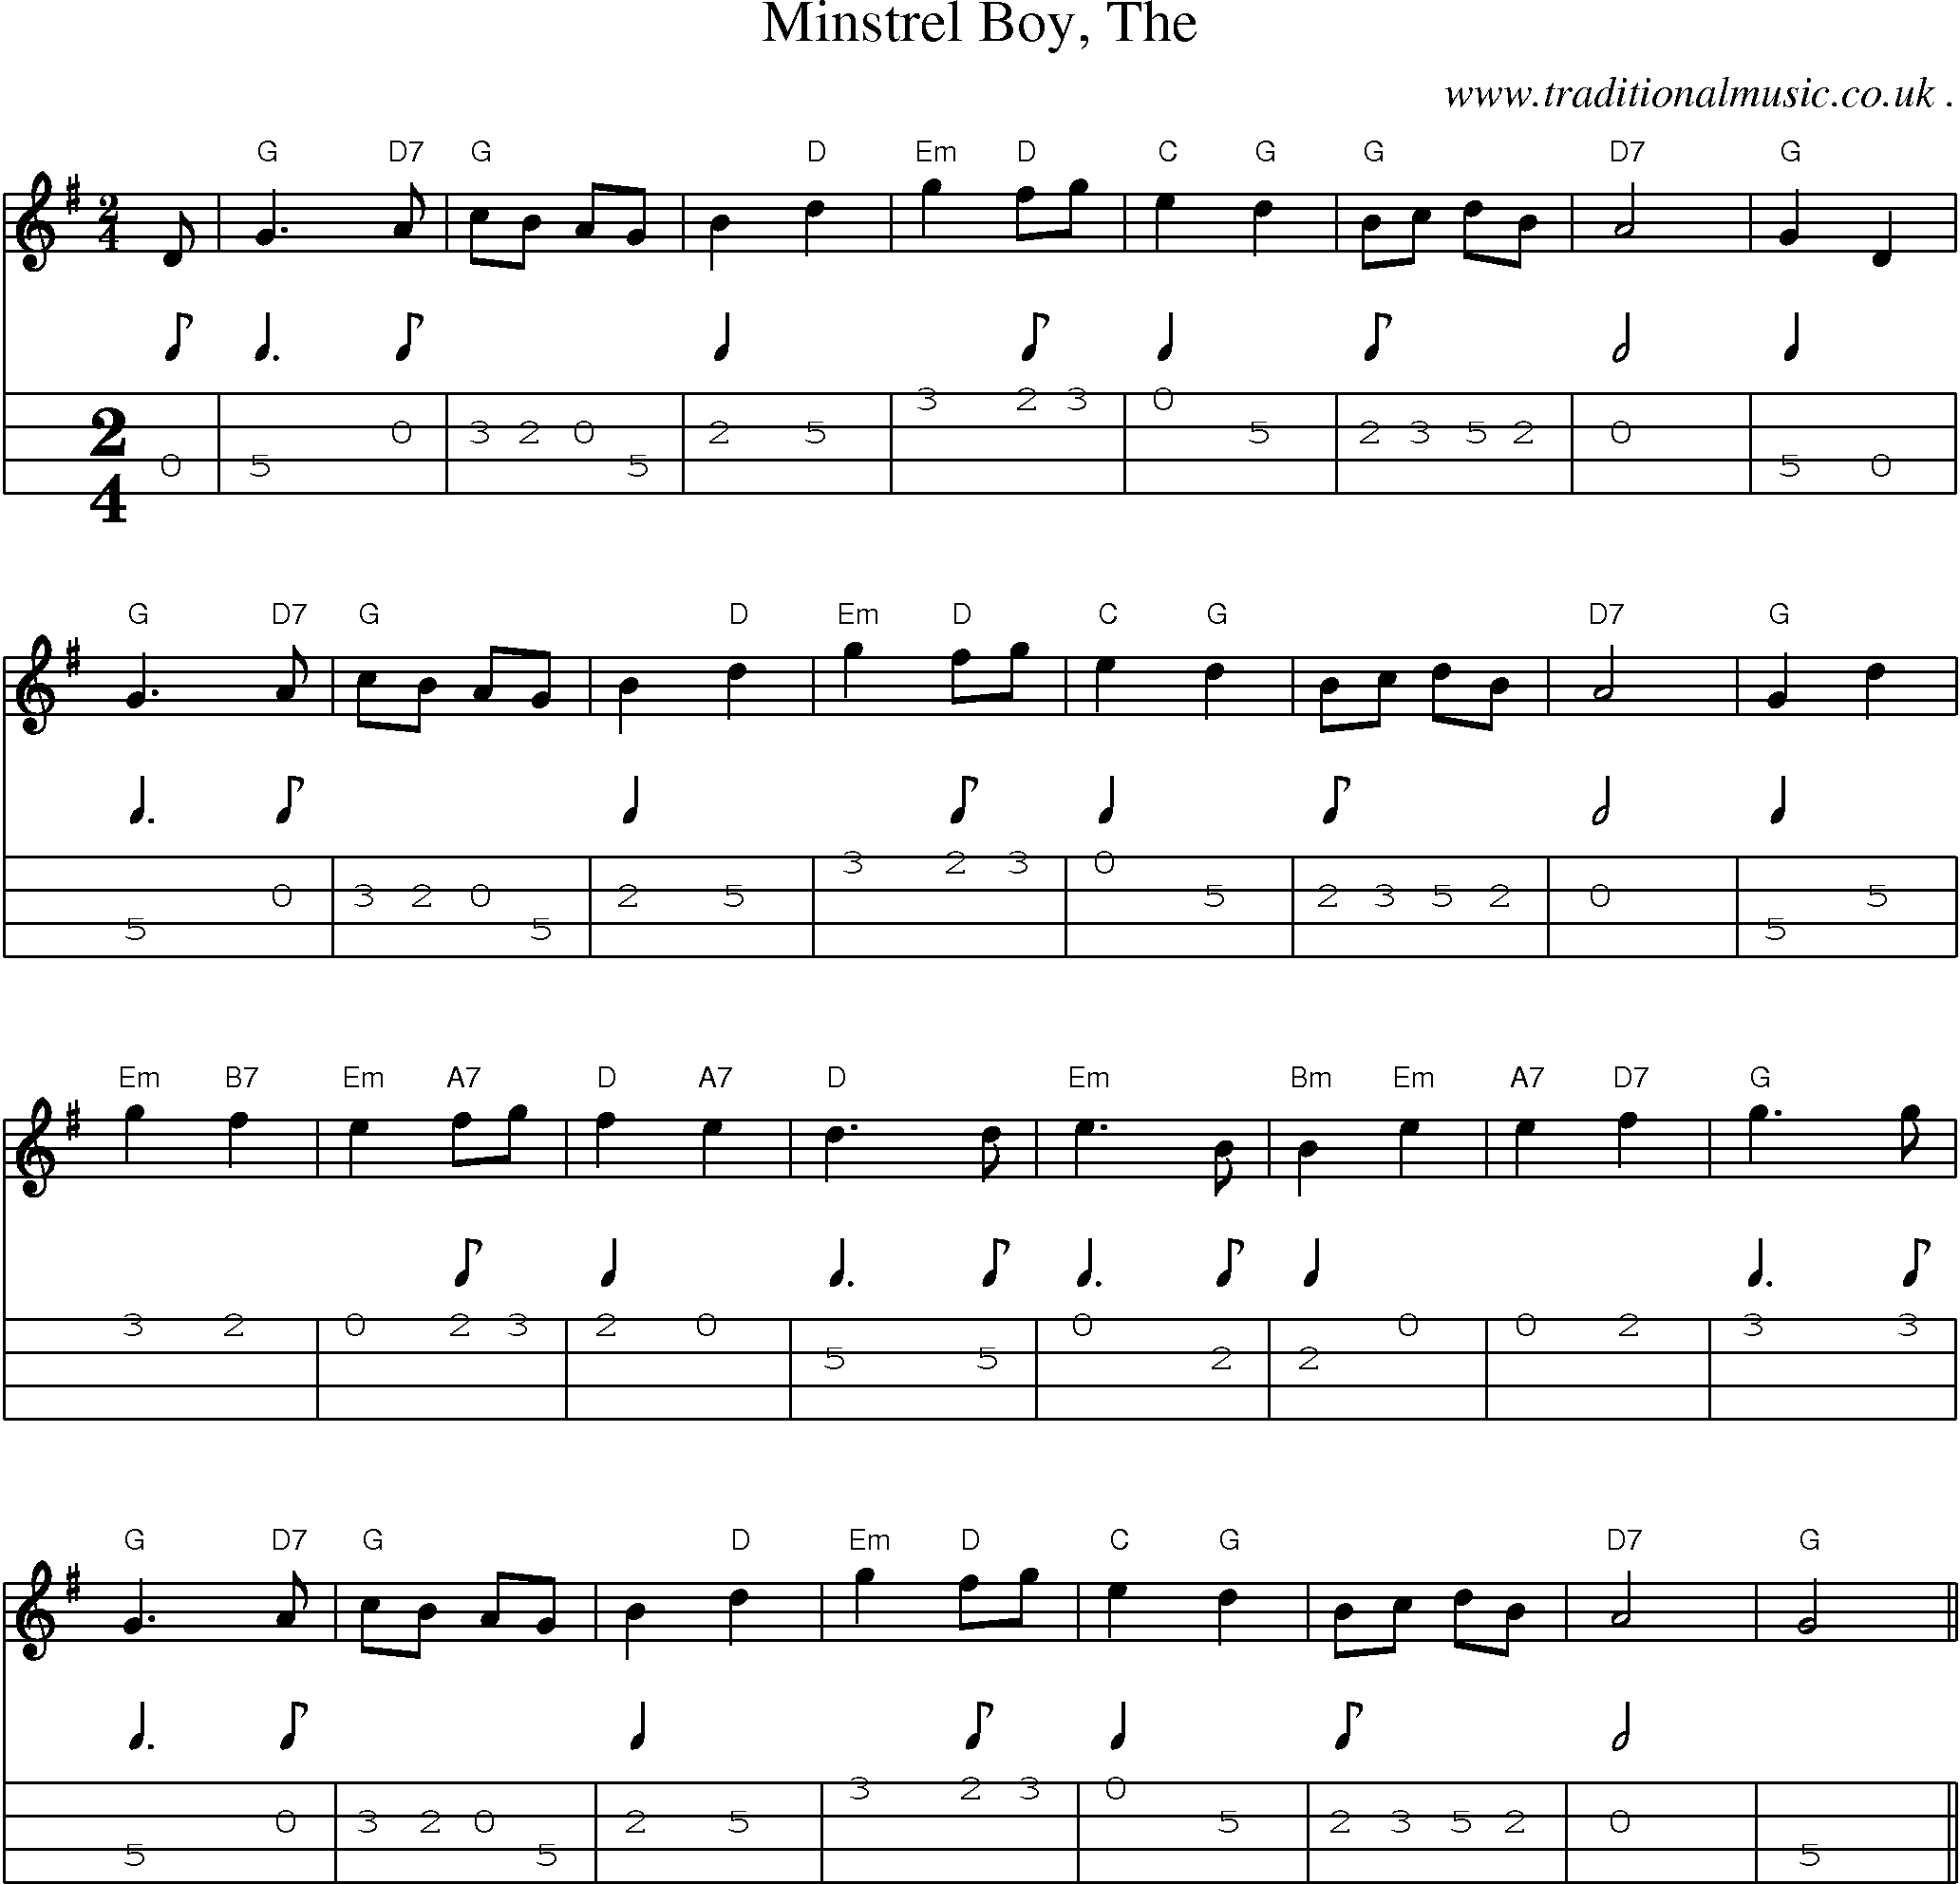 Music Score and Guitar Tabs for Minstrel Boy The